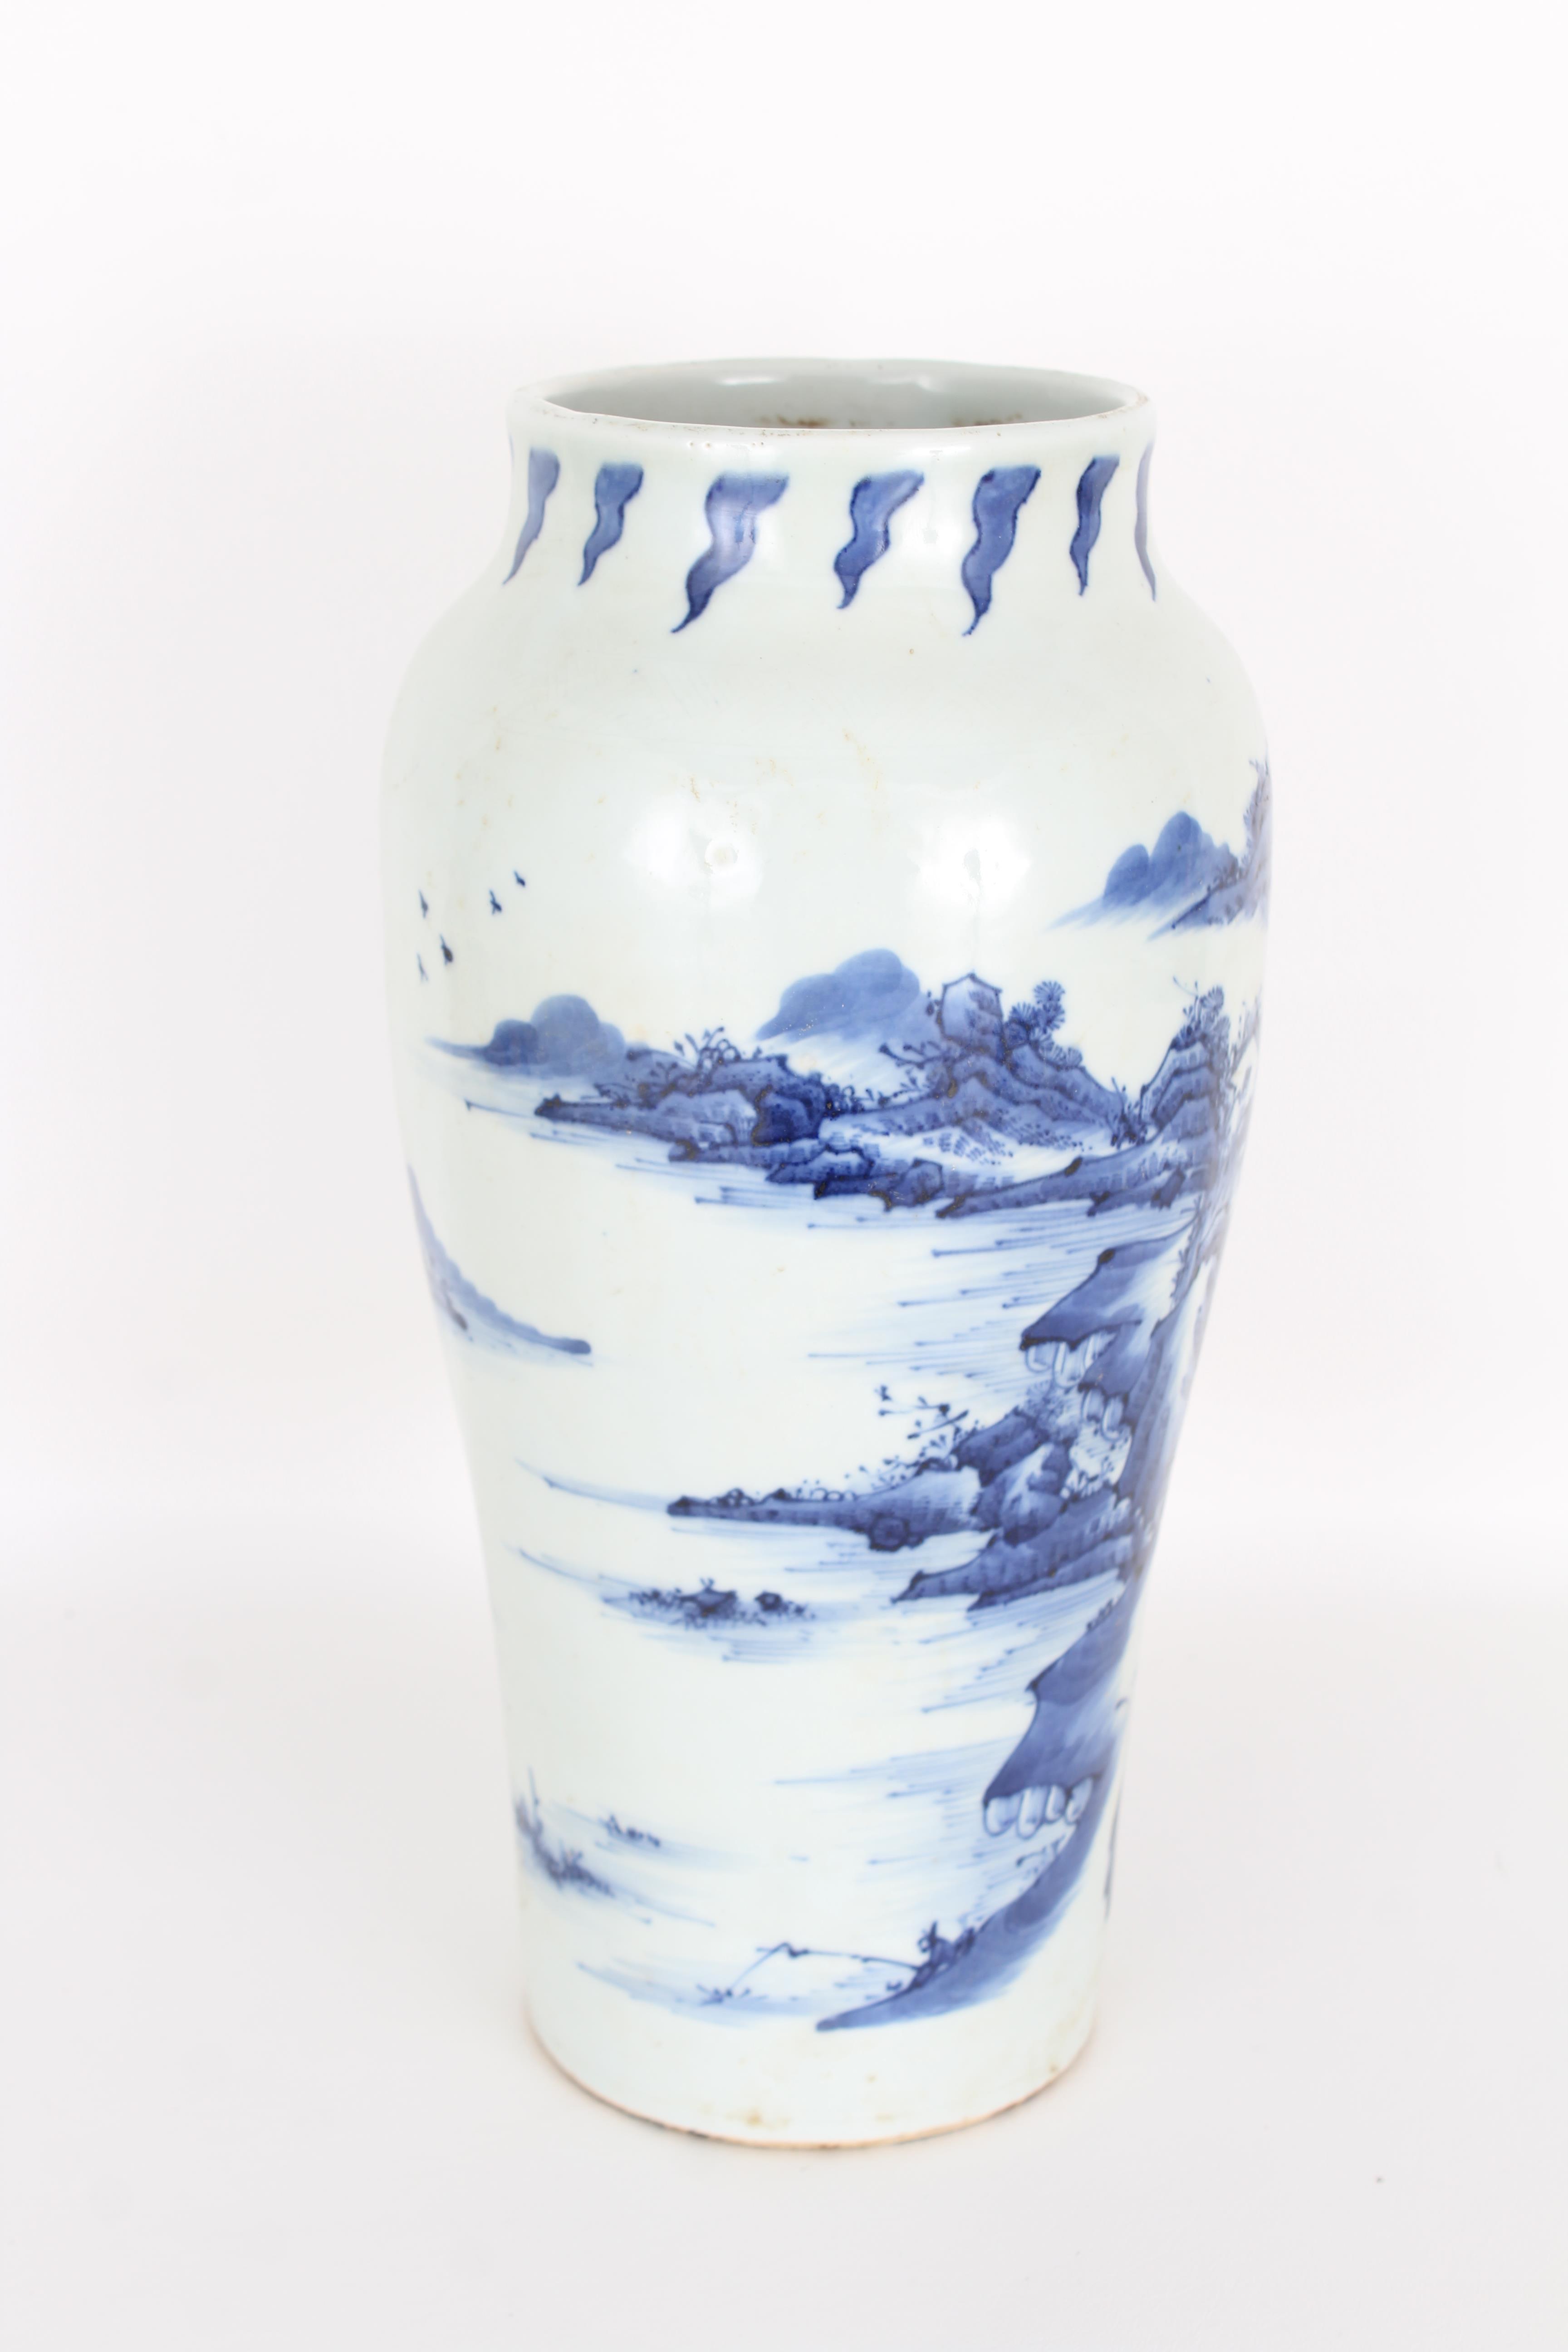 Chinese Blue and White Vase, 17th Century - Image 3 of 9